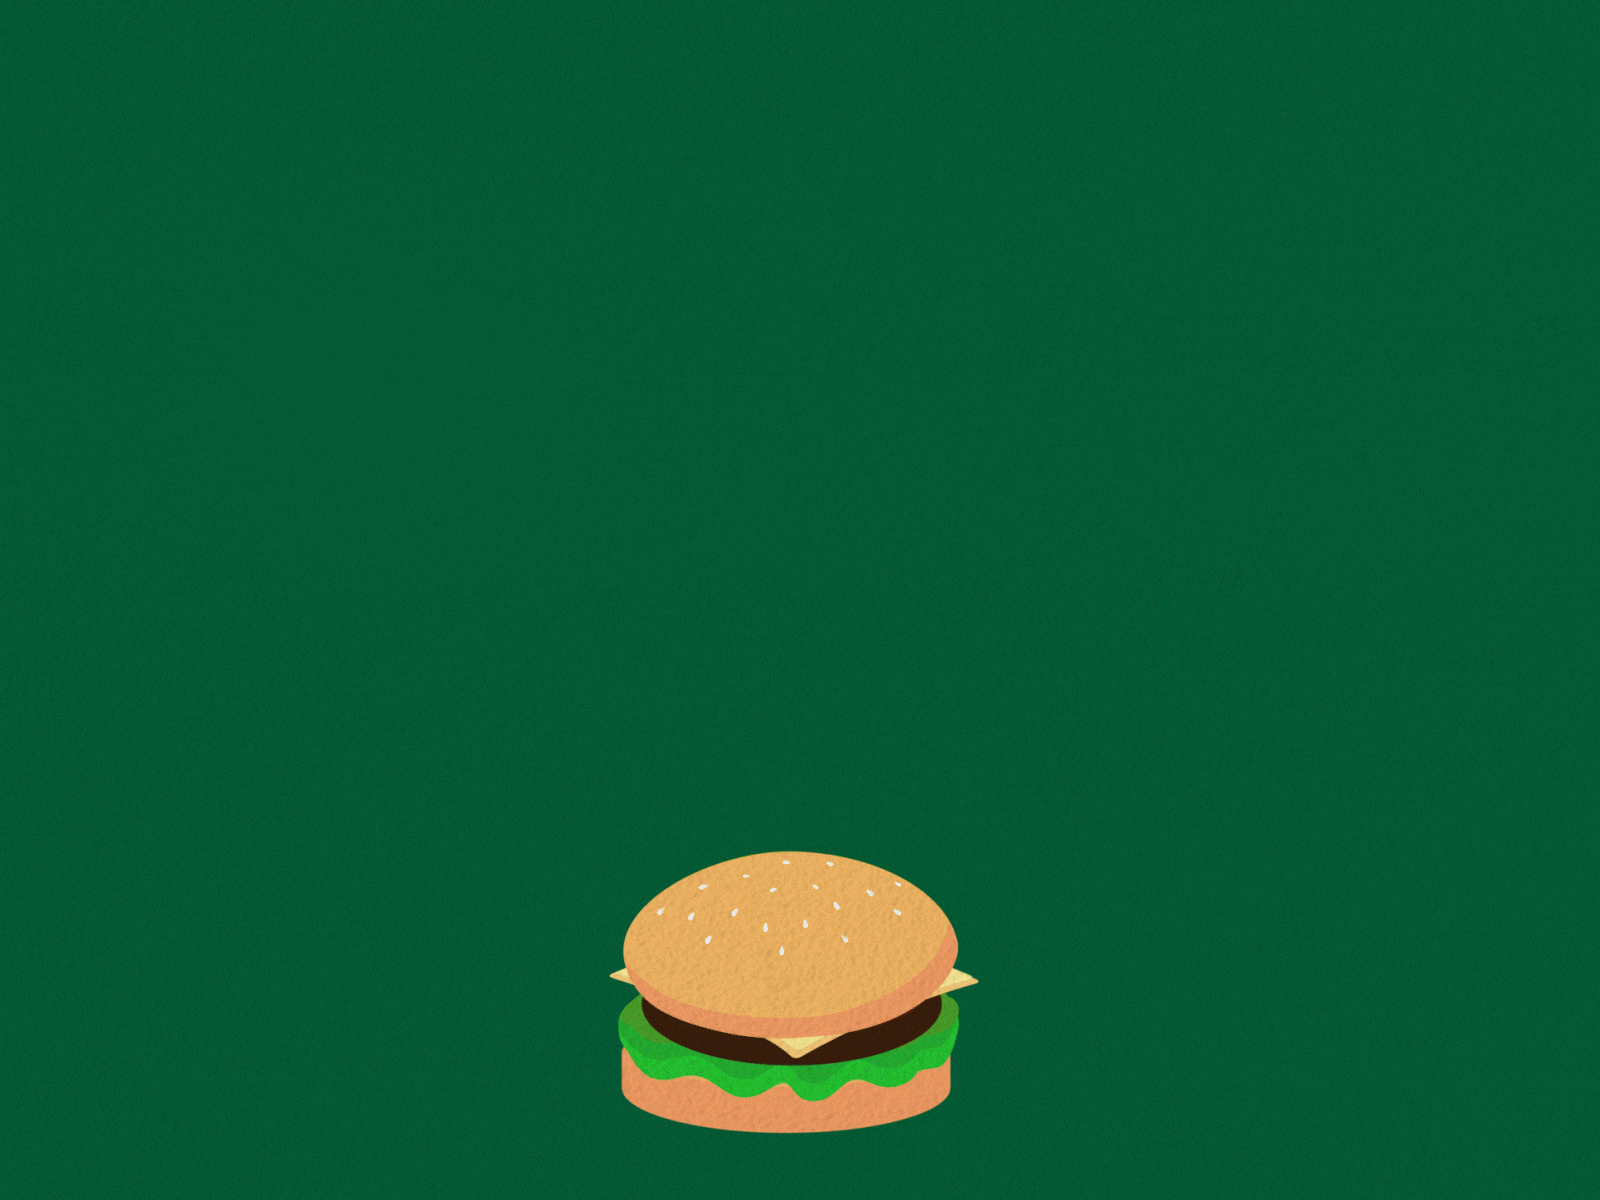 Burger #1 2d animation 2d illustration aftereffects animated gif animation animation after effects burger cartoon illustration food illustration foodie gif animation